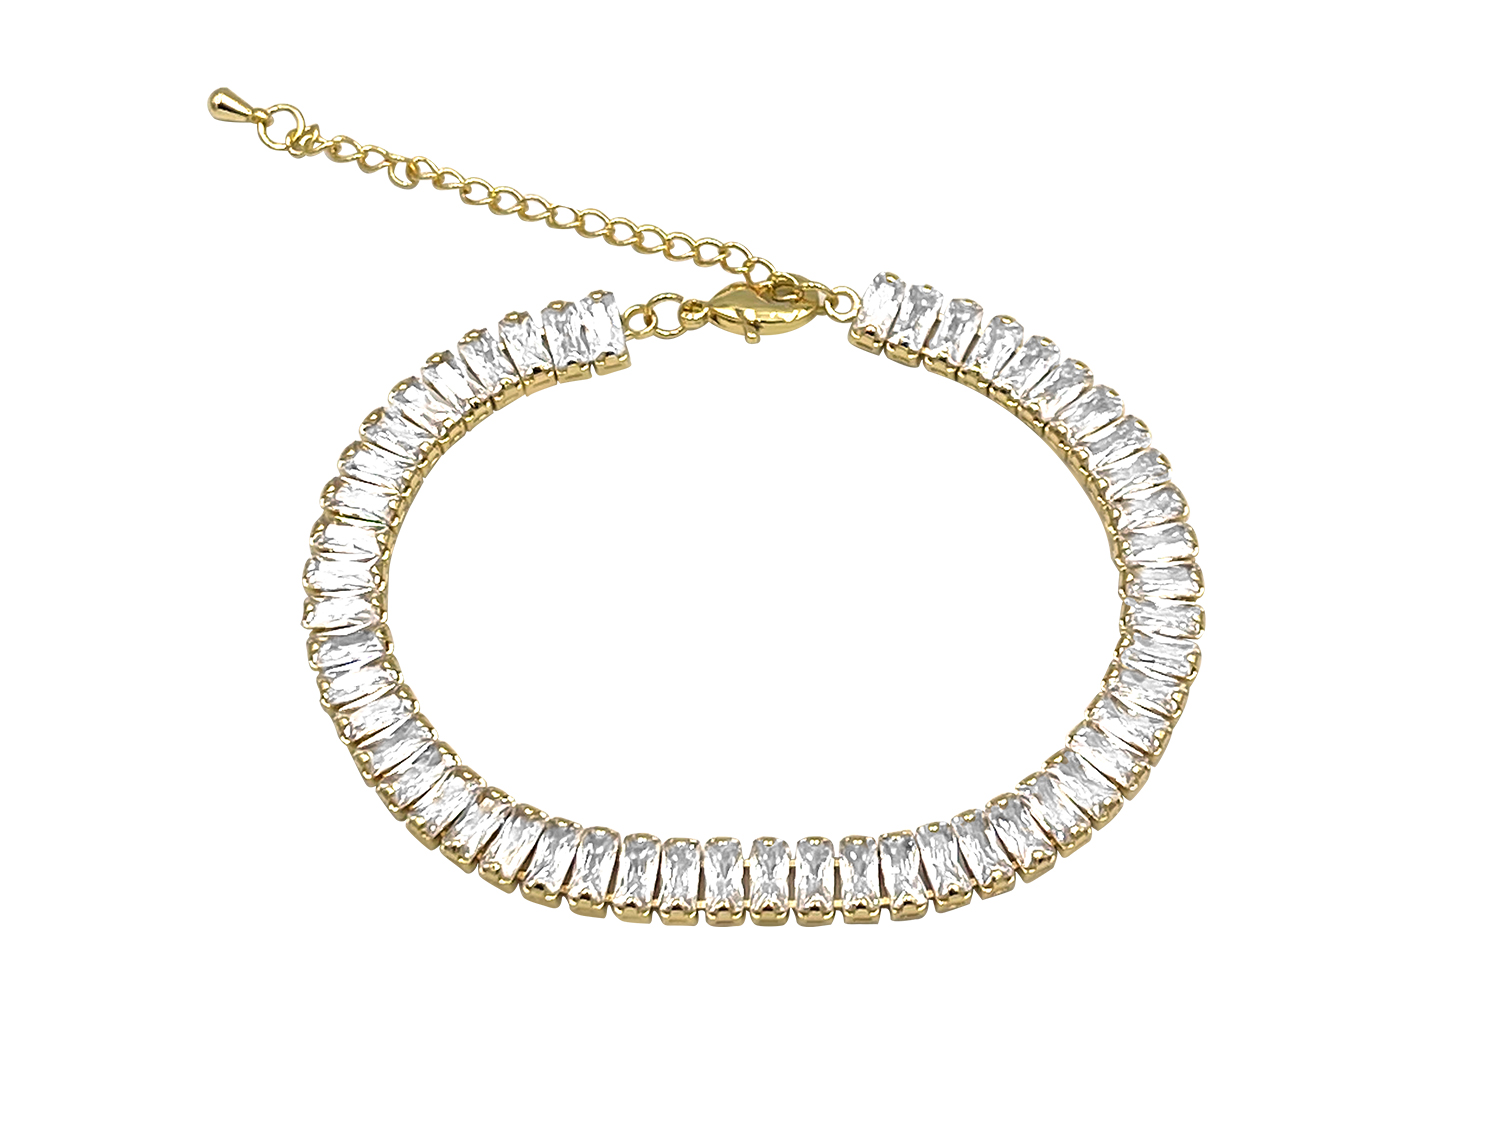 Sparkling Pave Gold Plated Chain Bracelet - Adema